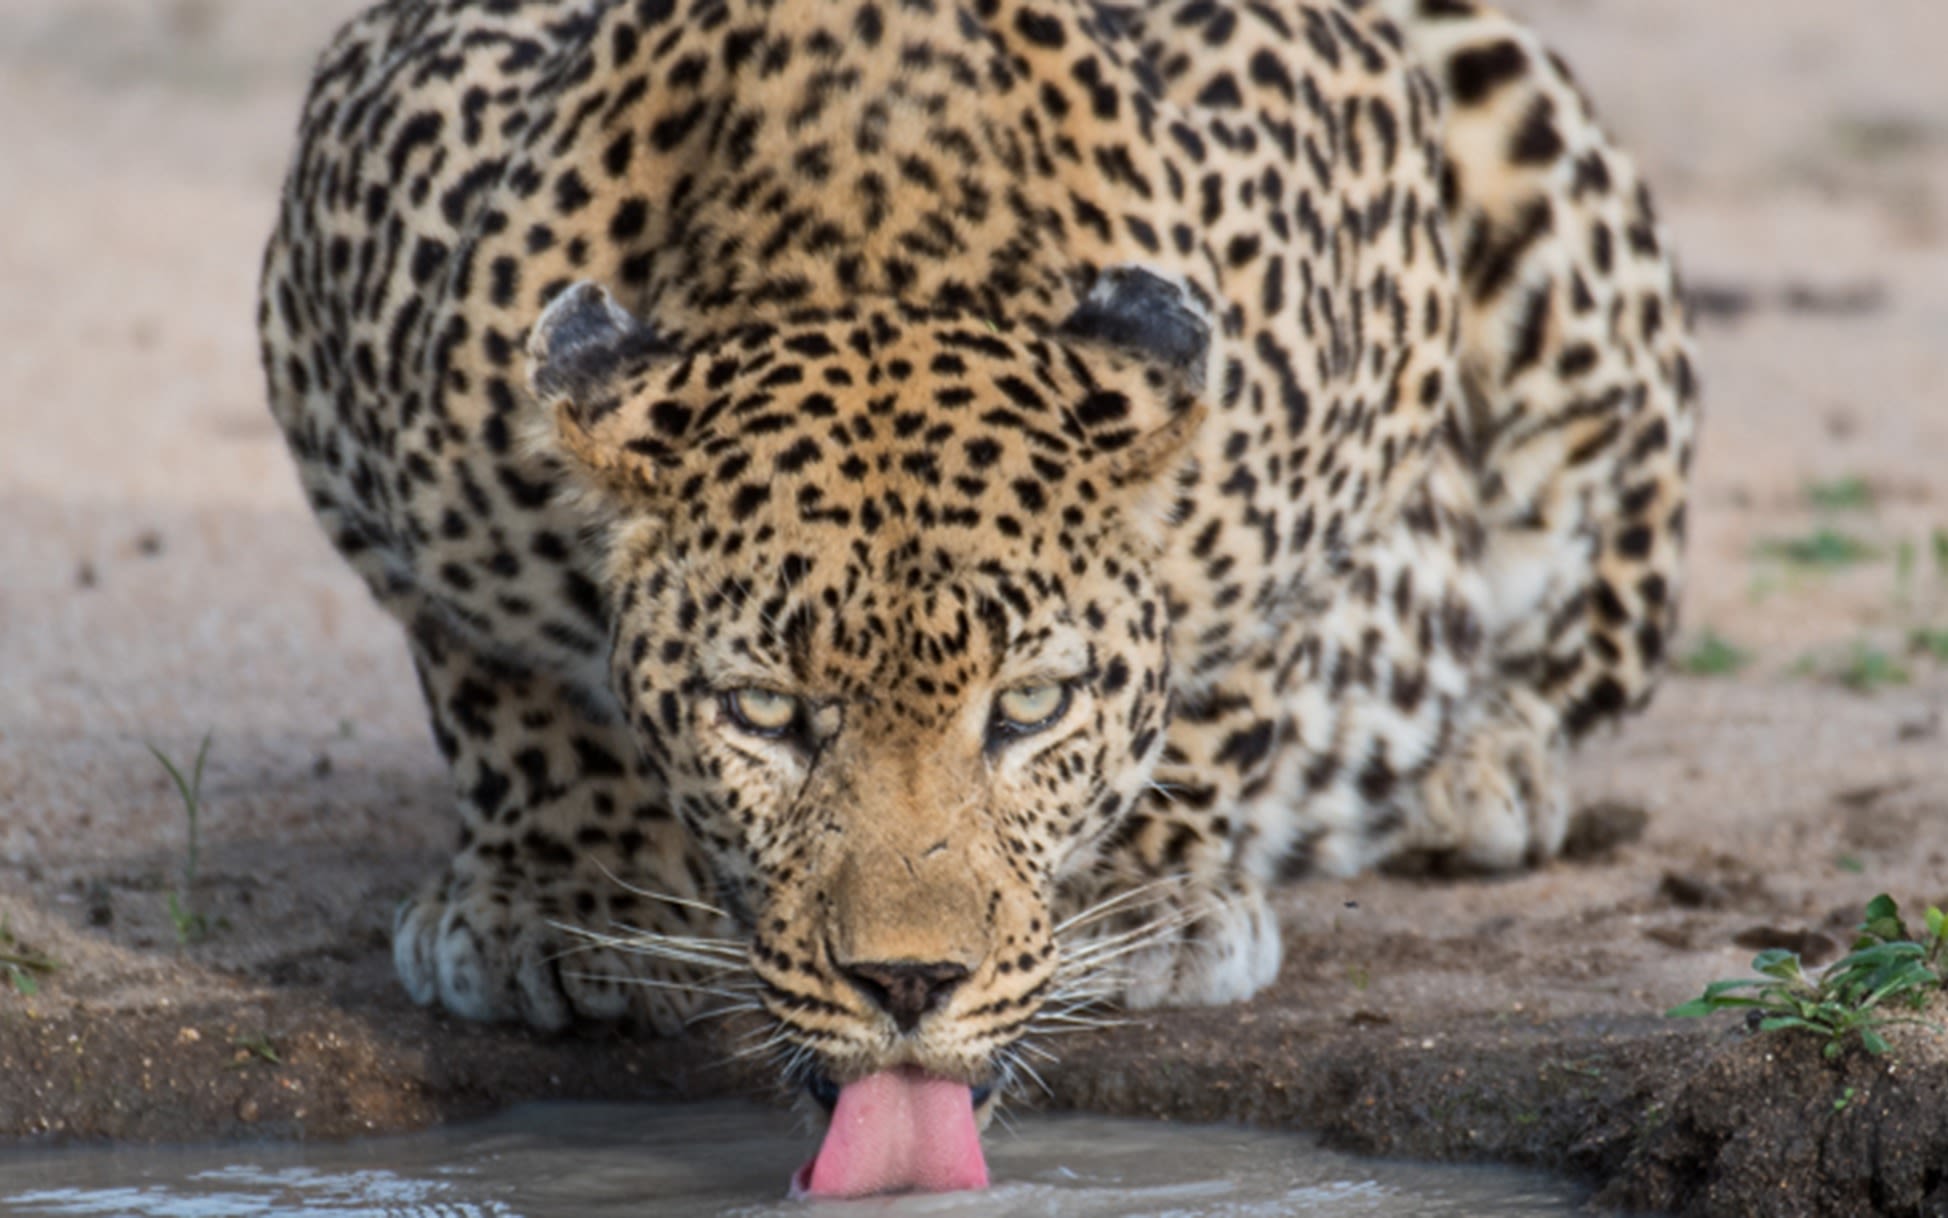 A leopard drinks from a watering hole at Ulusaba